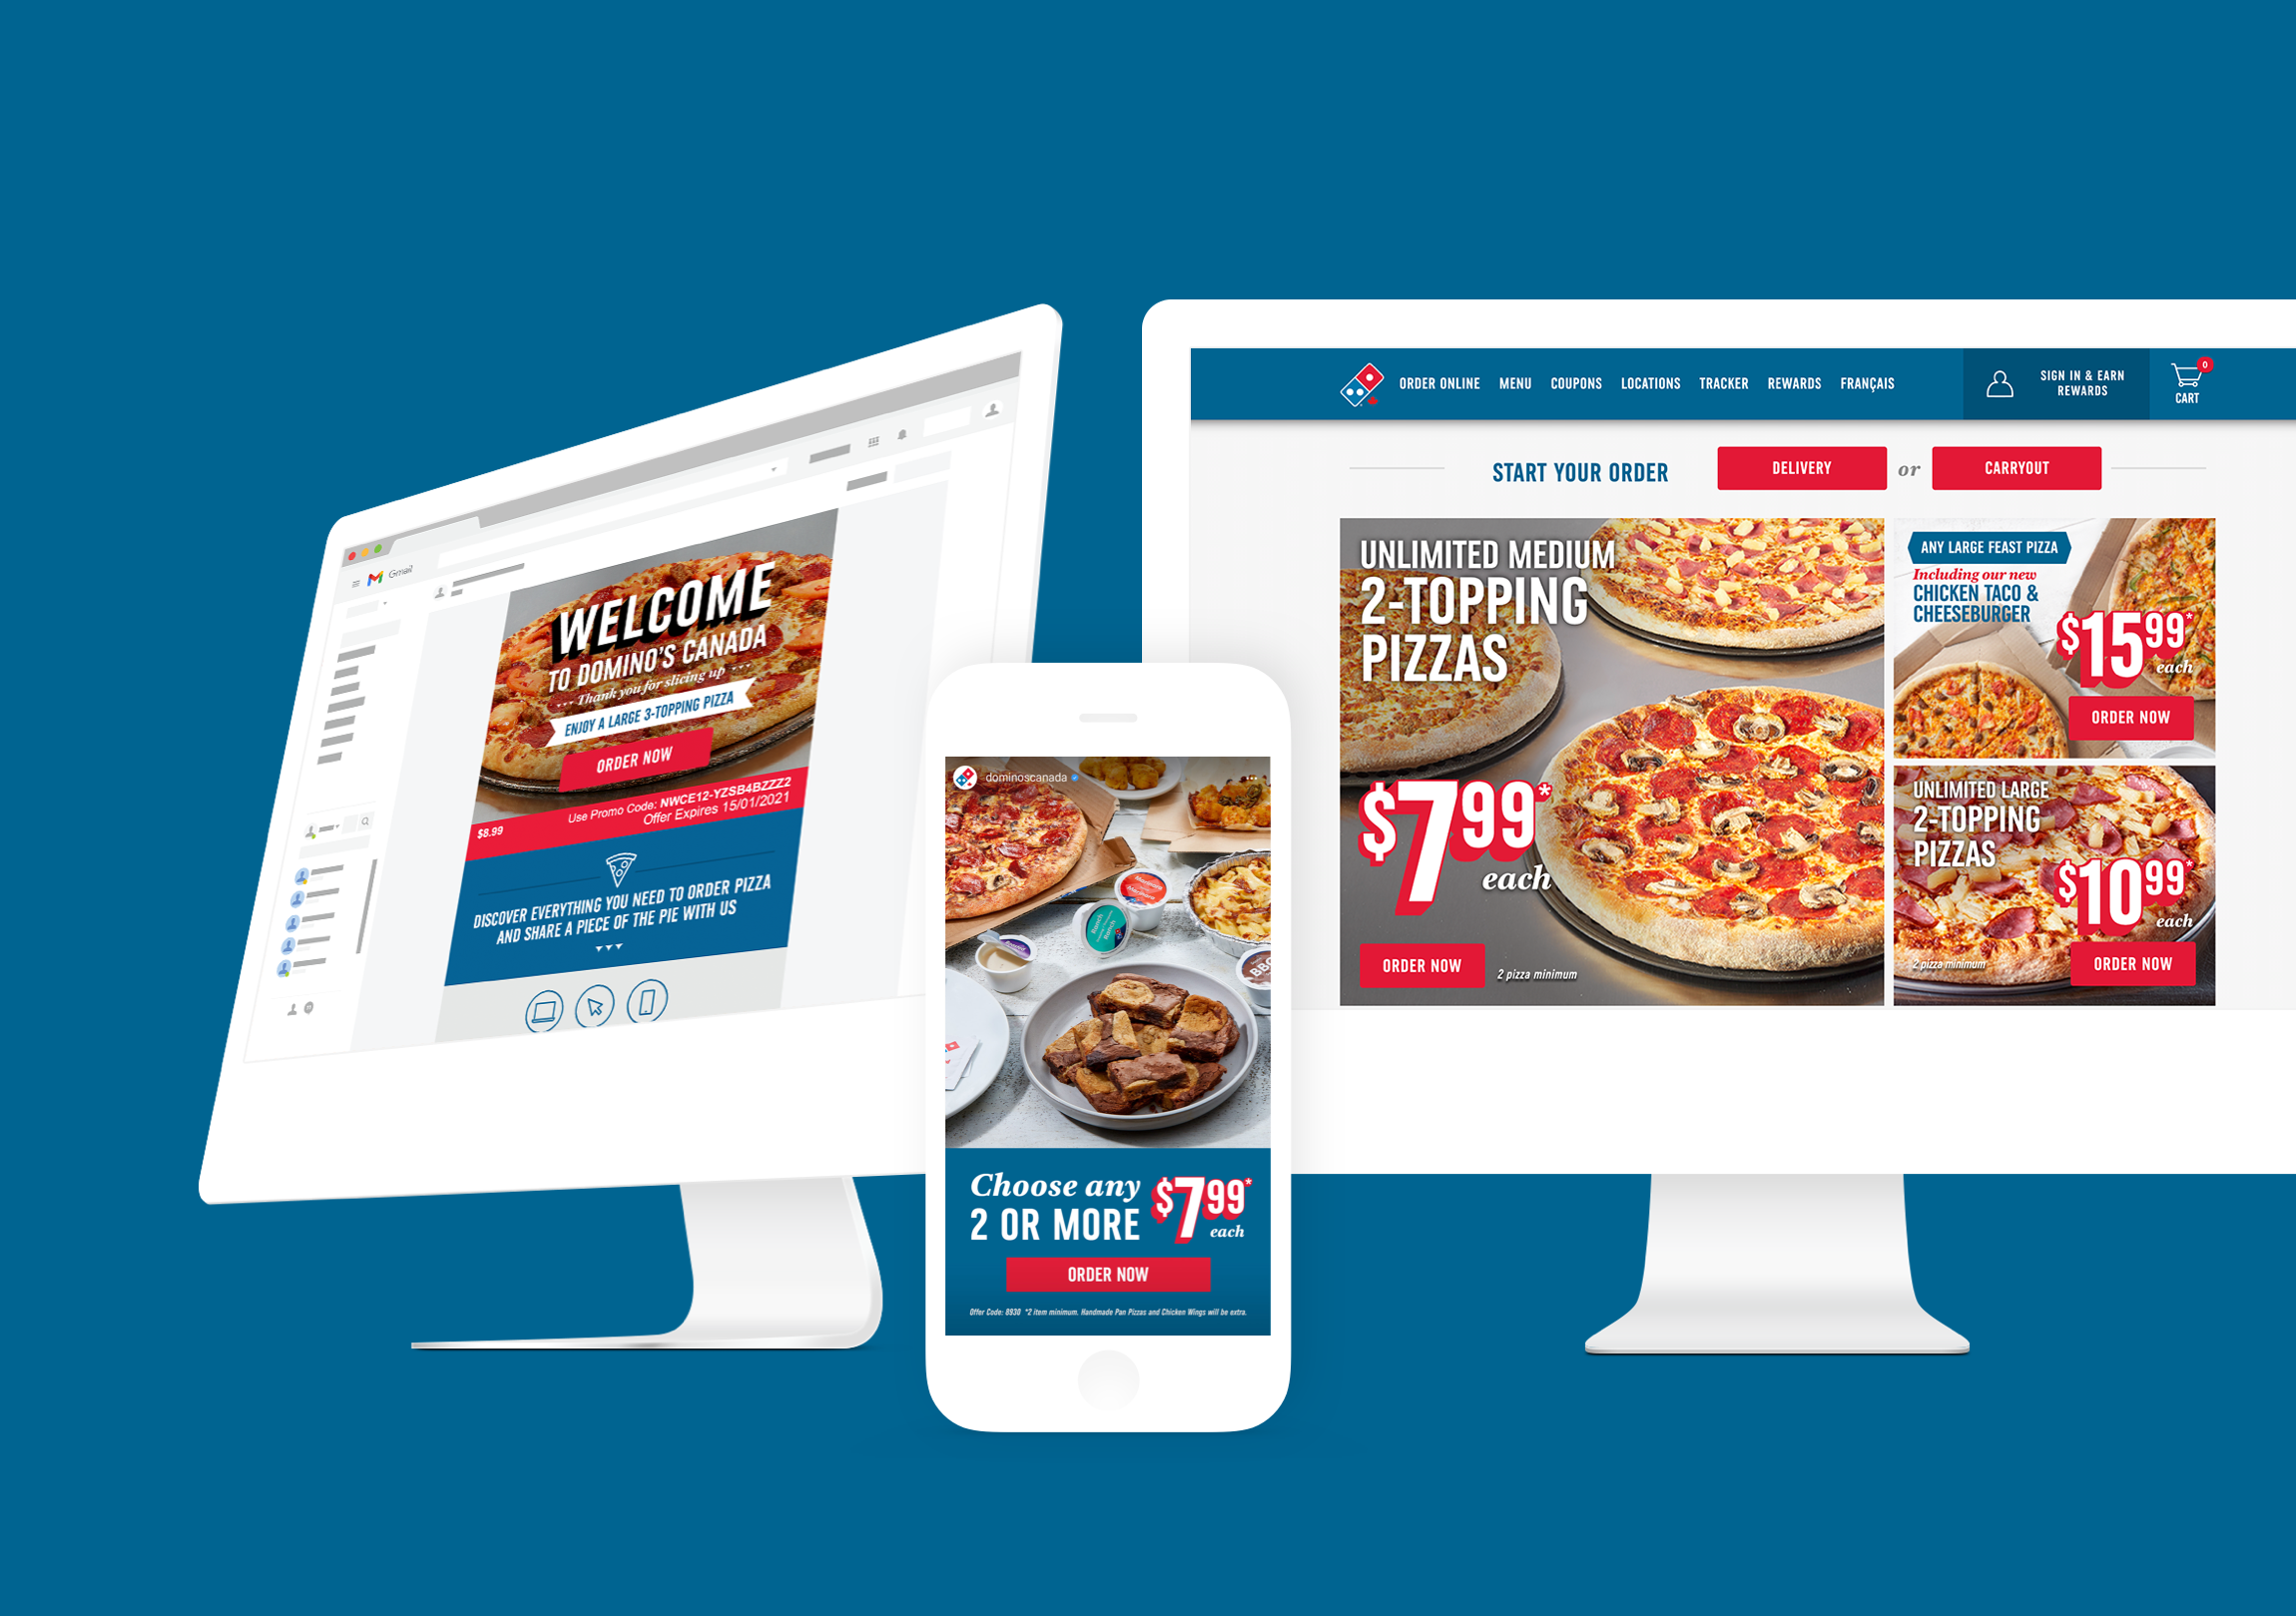 Domino's Canada Site shown on two desktops and the mobile app shown on a phone screen